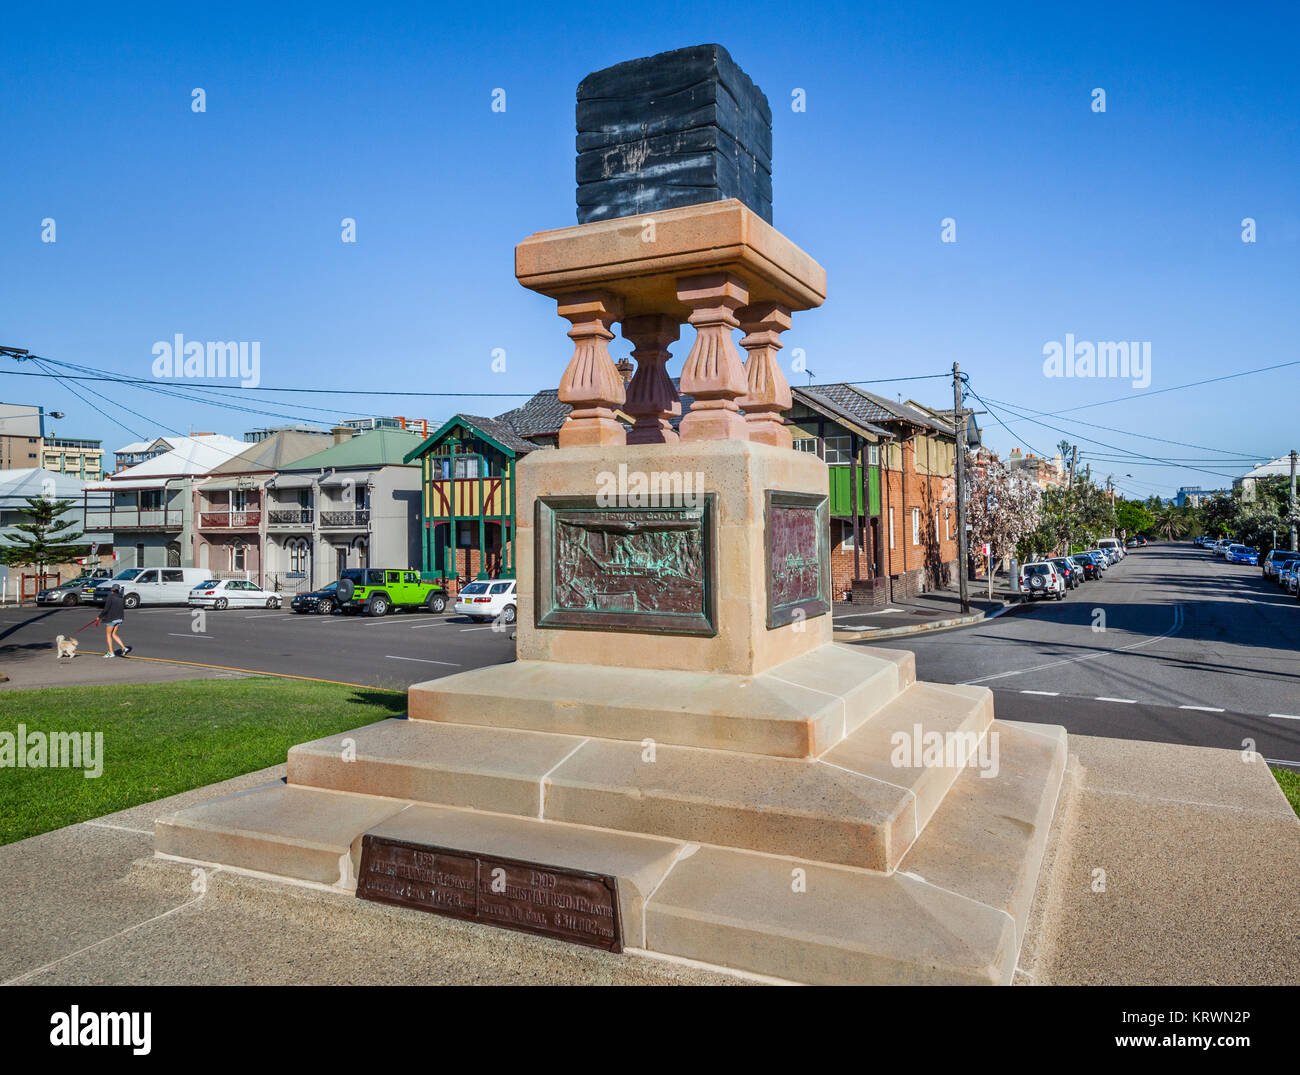 Australia, New South Wales, Newcastle, view of the Coal Monument, erected by the citizens of Newcastle as symbolic of the coal mining industry for whi Stock Photo